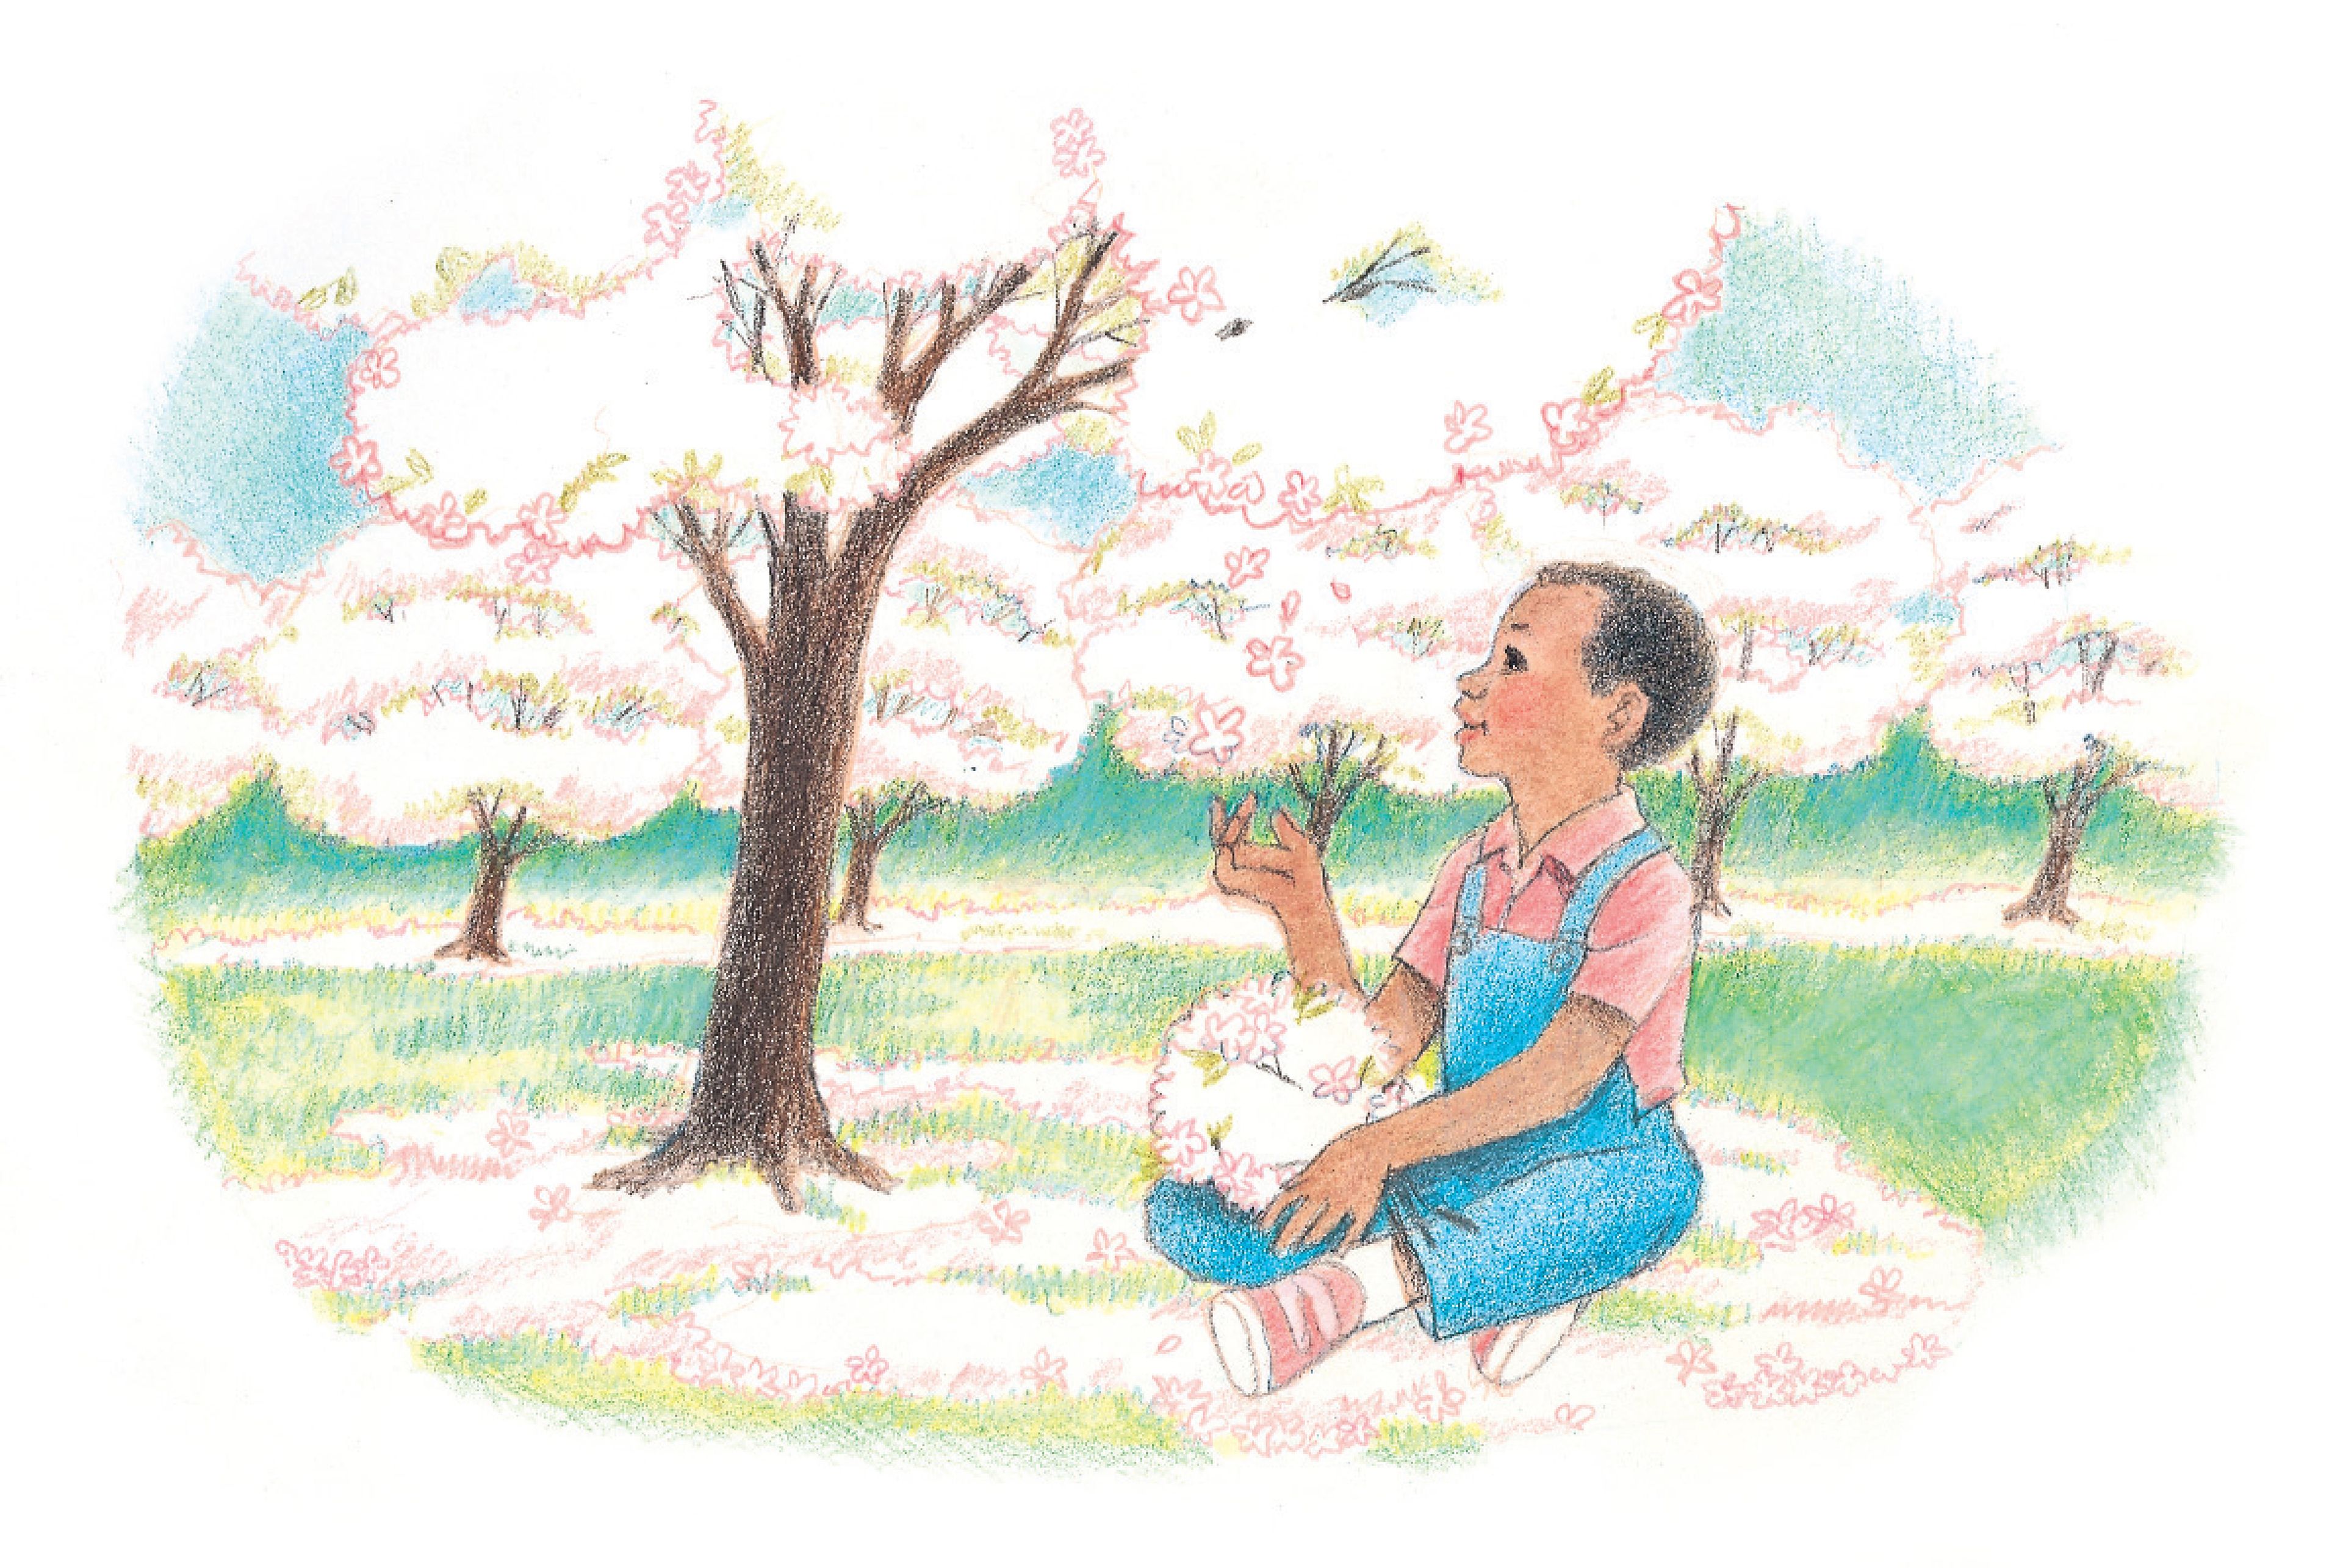 A boy sits on the ground, gathering tree blossoms. From the Children’s Songbook, page 242, “Popcorn Popping”; watercolor illustration by Virginia Sargent.